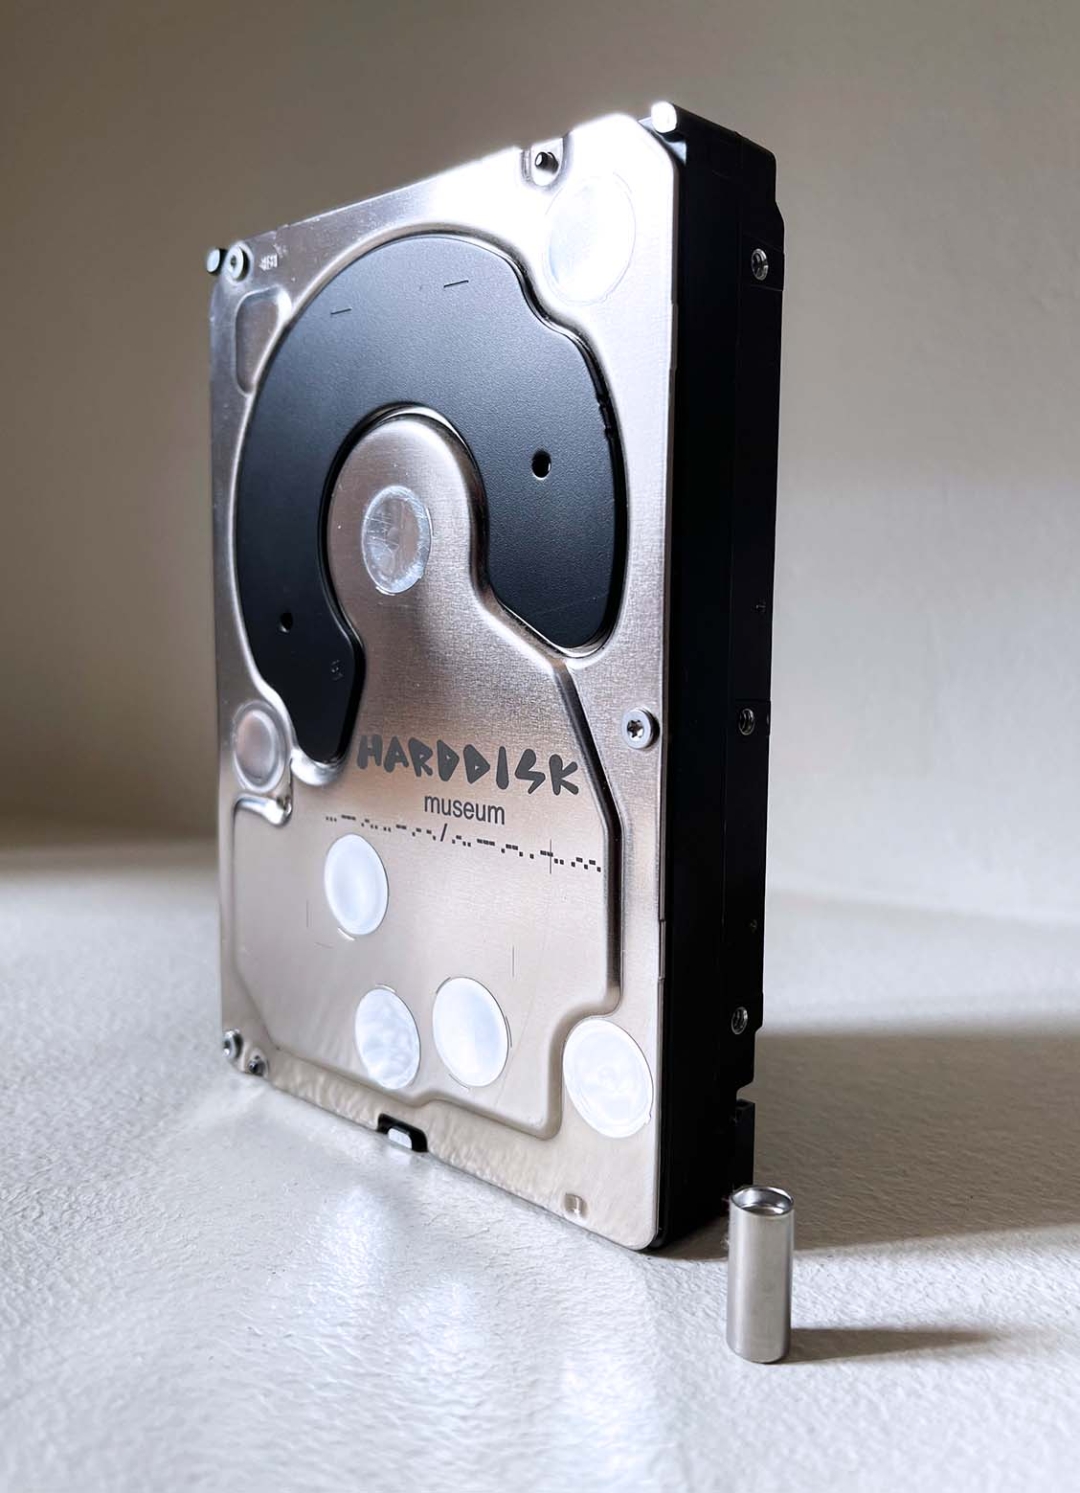 The Harddiskmuseum, founded in 2013, is a museum of digital files on a hard drive